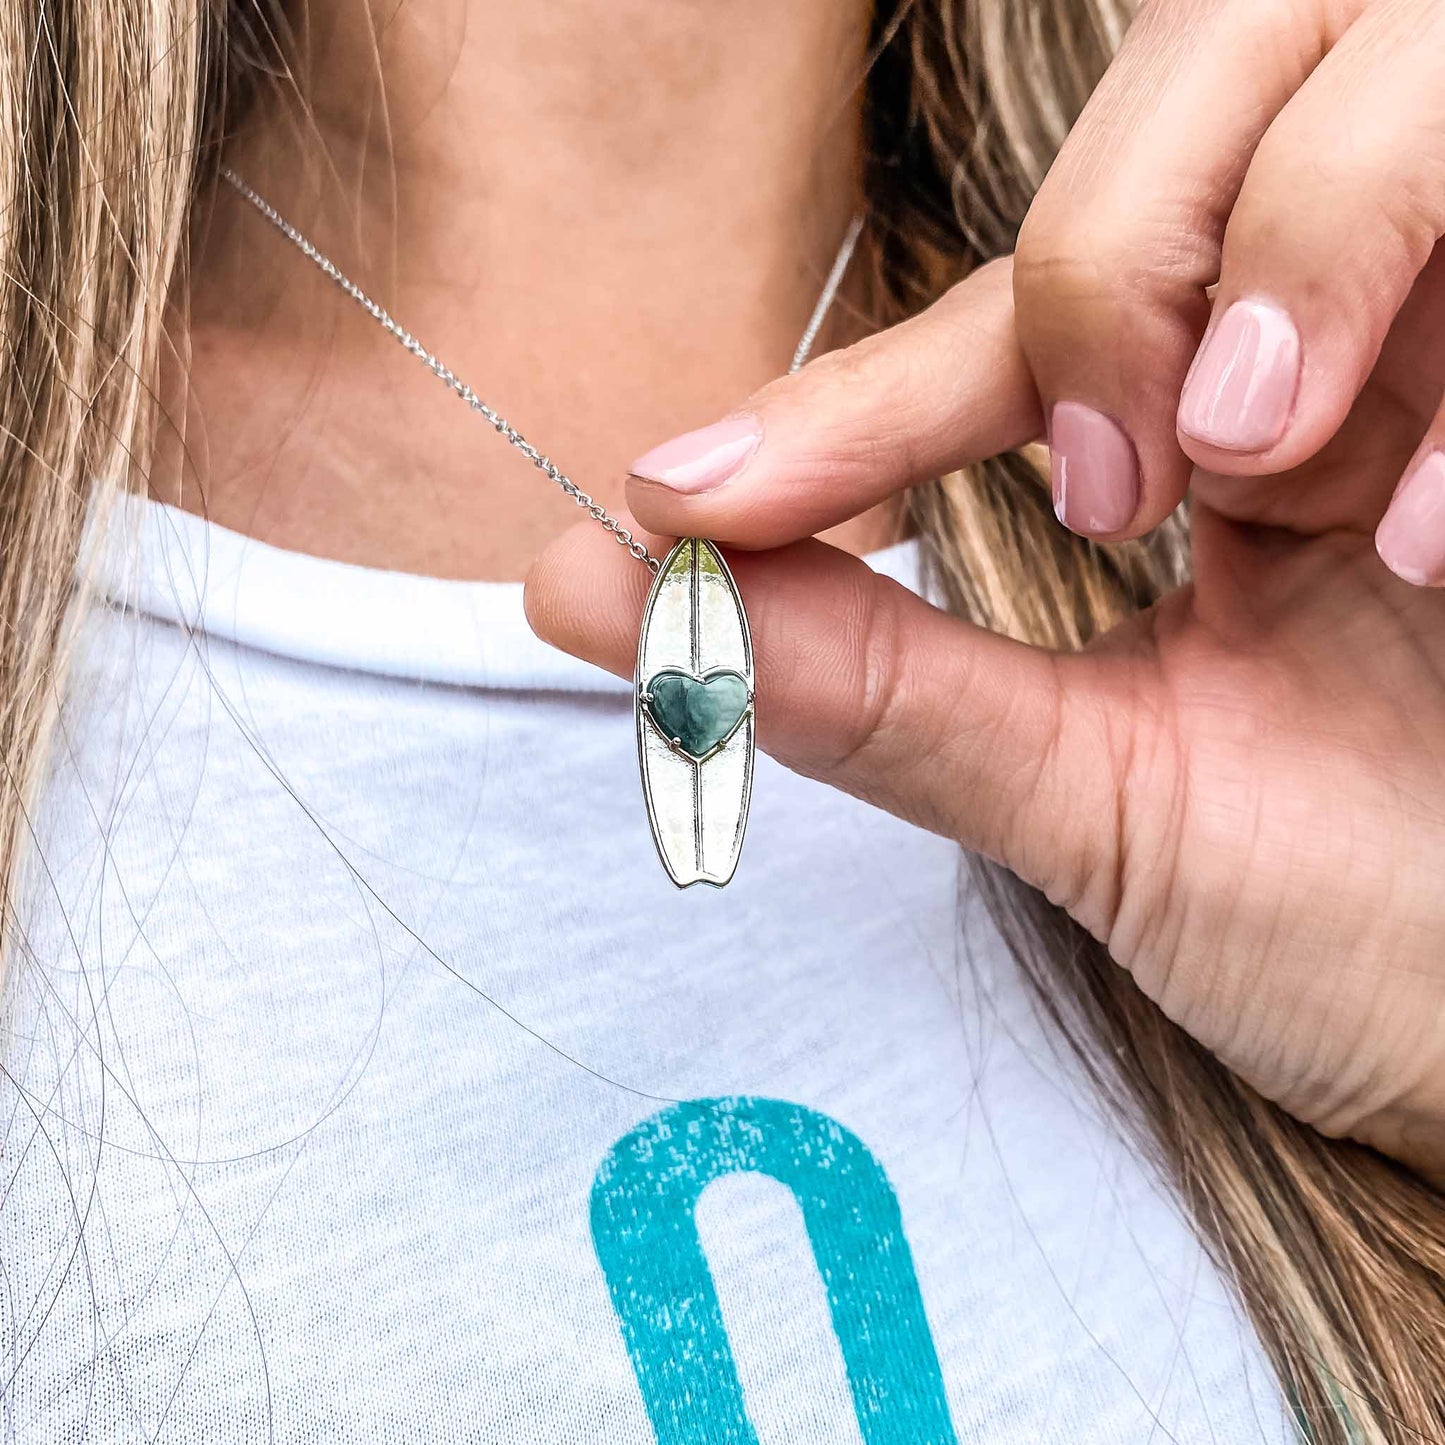 What's the surf forecast for today? While Surfline helps with the swell, wind & wave forecasts we help you show off your passion for surfing. Whether you're surfing or just checking the waves at Pipeline, take your surfboard, always. Shop the May's birthstone surf jewelry online or at a surf shop near you.